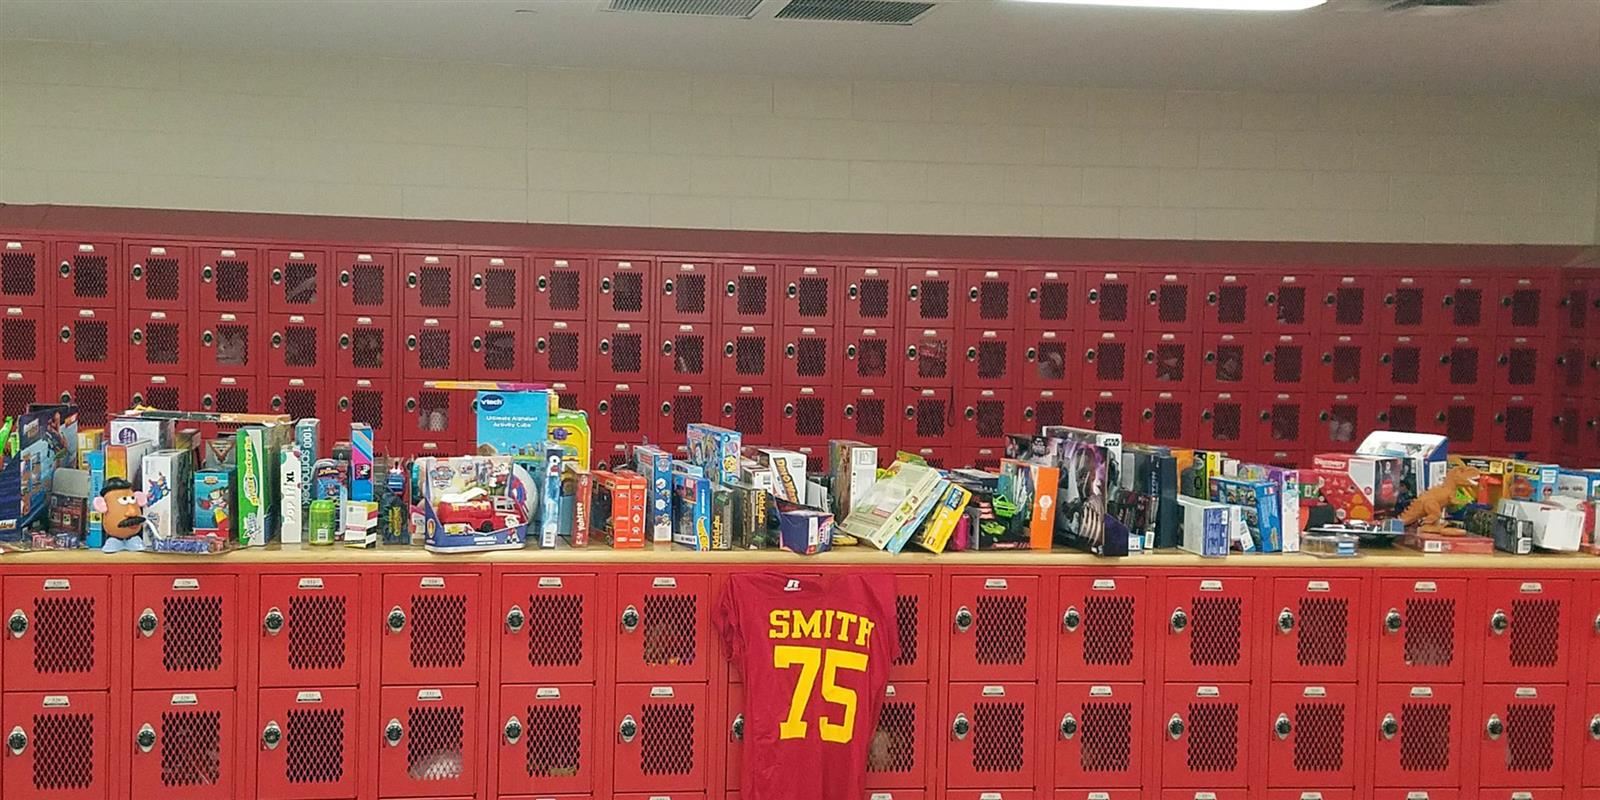 Smith Middle School participates in CALI BEAR toy drive.